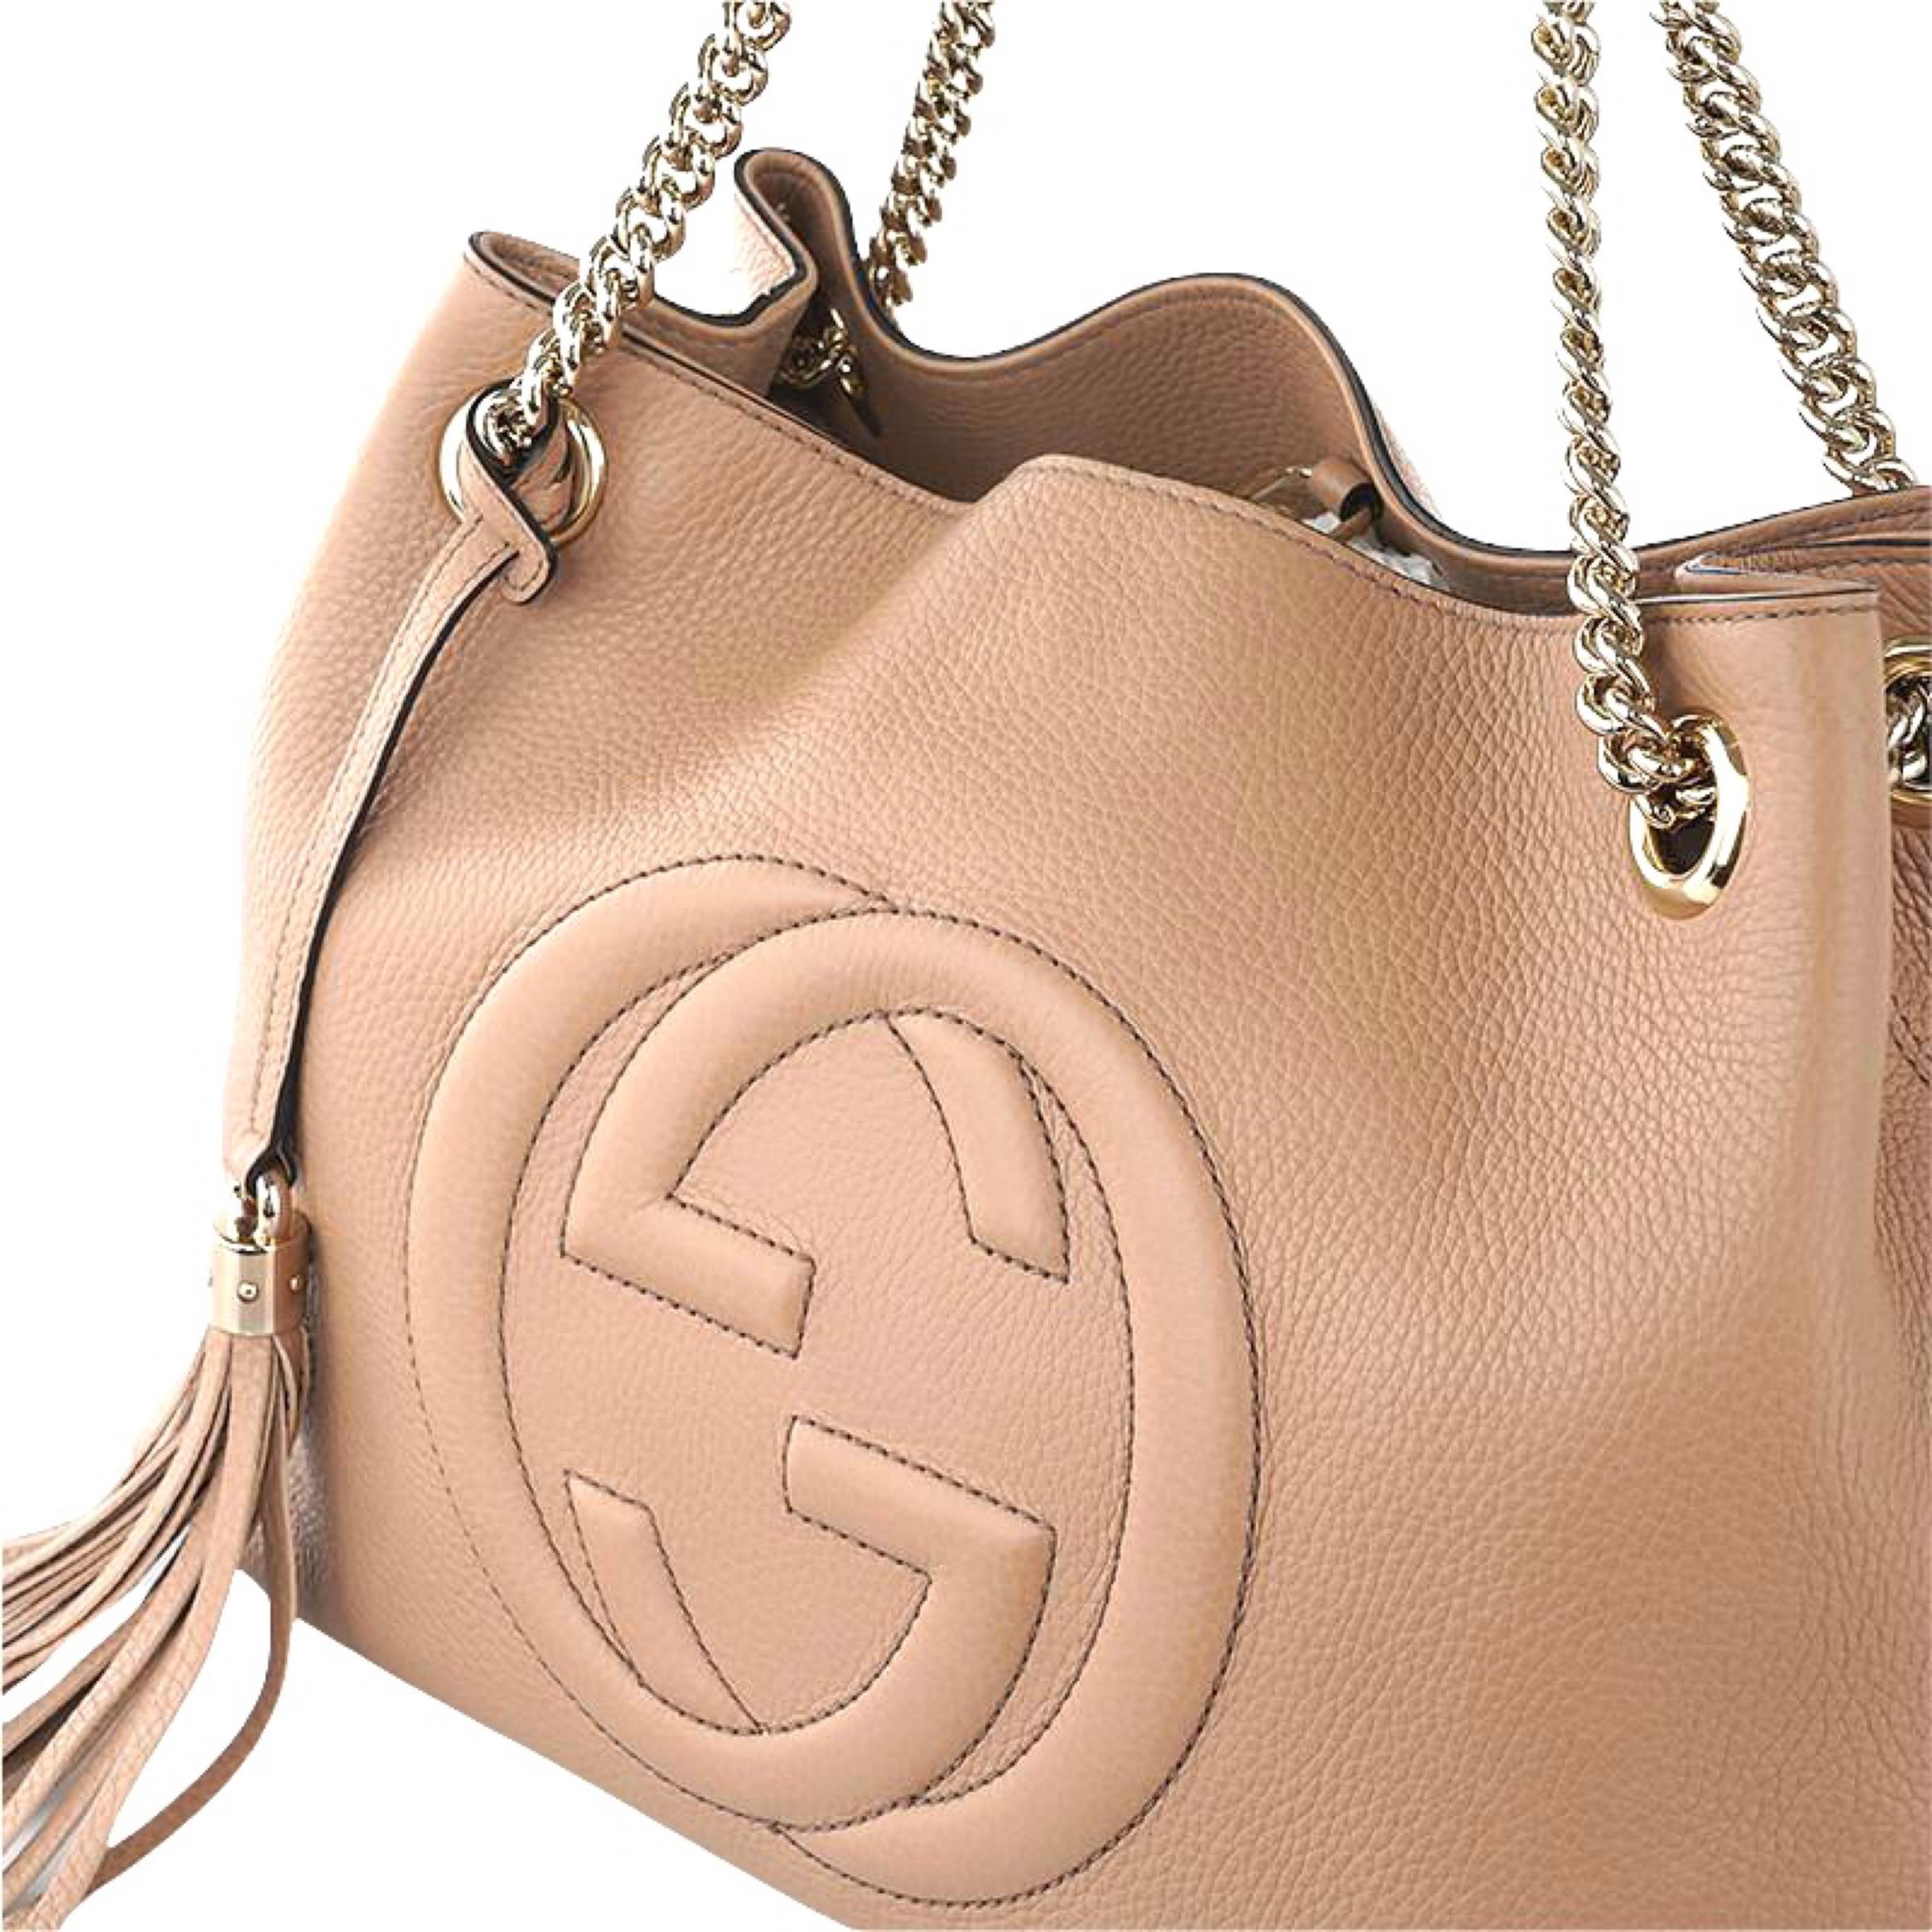 NEW Gucci Beige Pebbled Leather Medium Soho Chain Tote Shoulder Bag For Sale 7